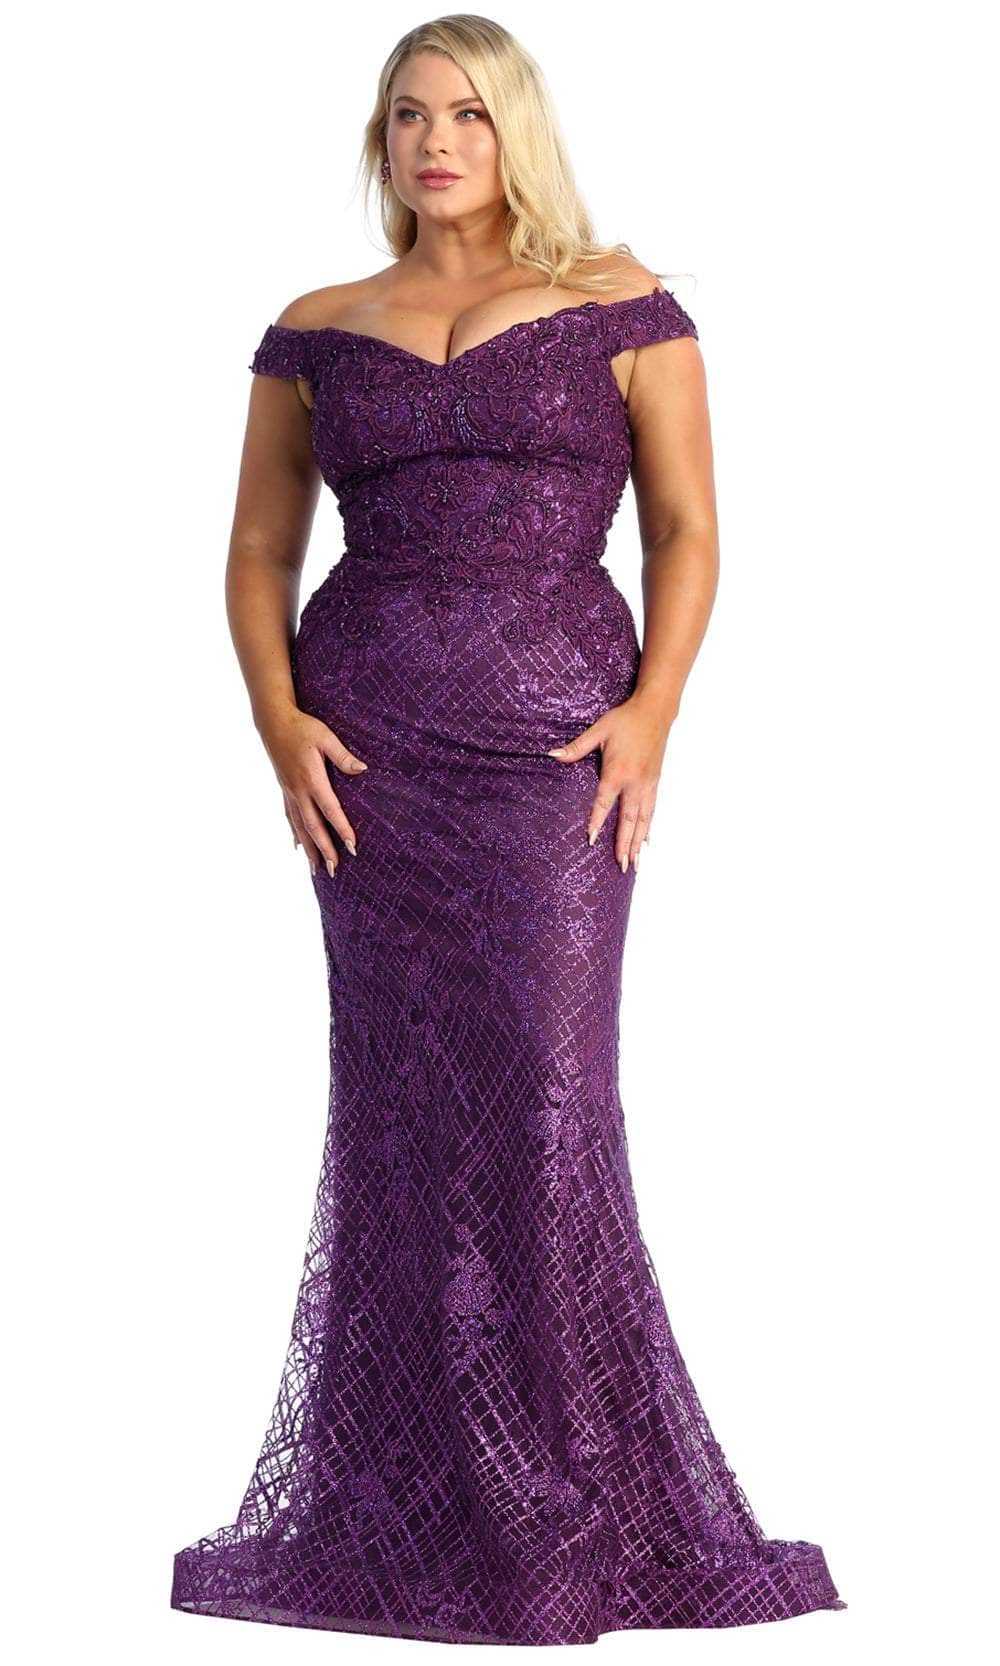 May Queen, May Queen RQ7930 - Embroidered Sheath Evening Dress